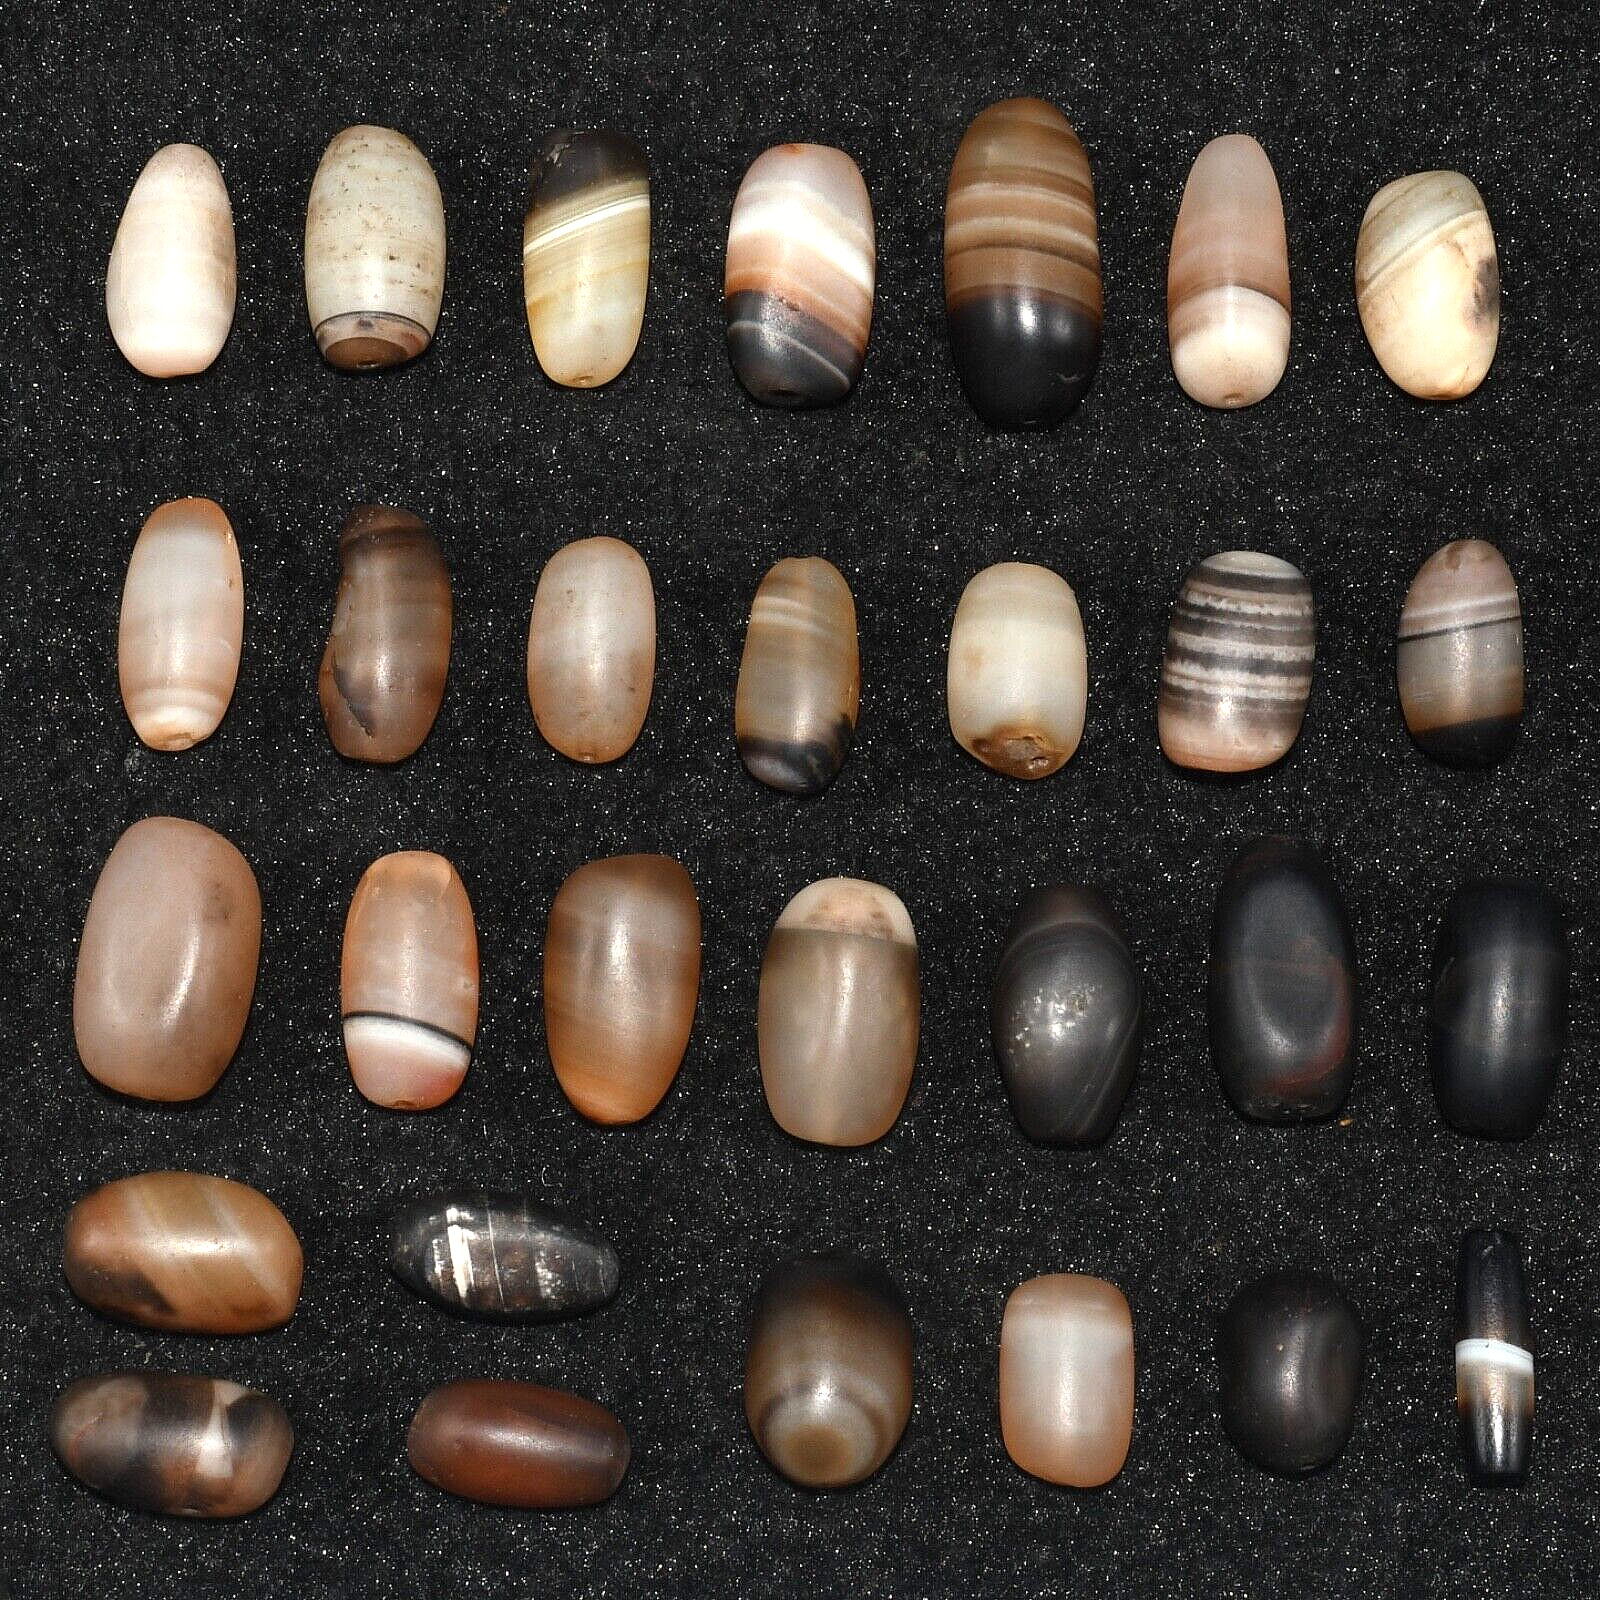 29 Ancient Tibetan Himalayan Agate Stone Dzi Beads in very Good Condition